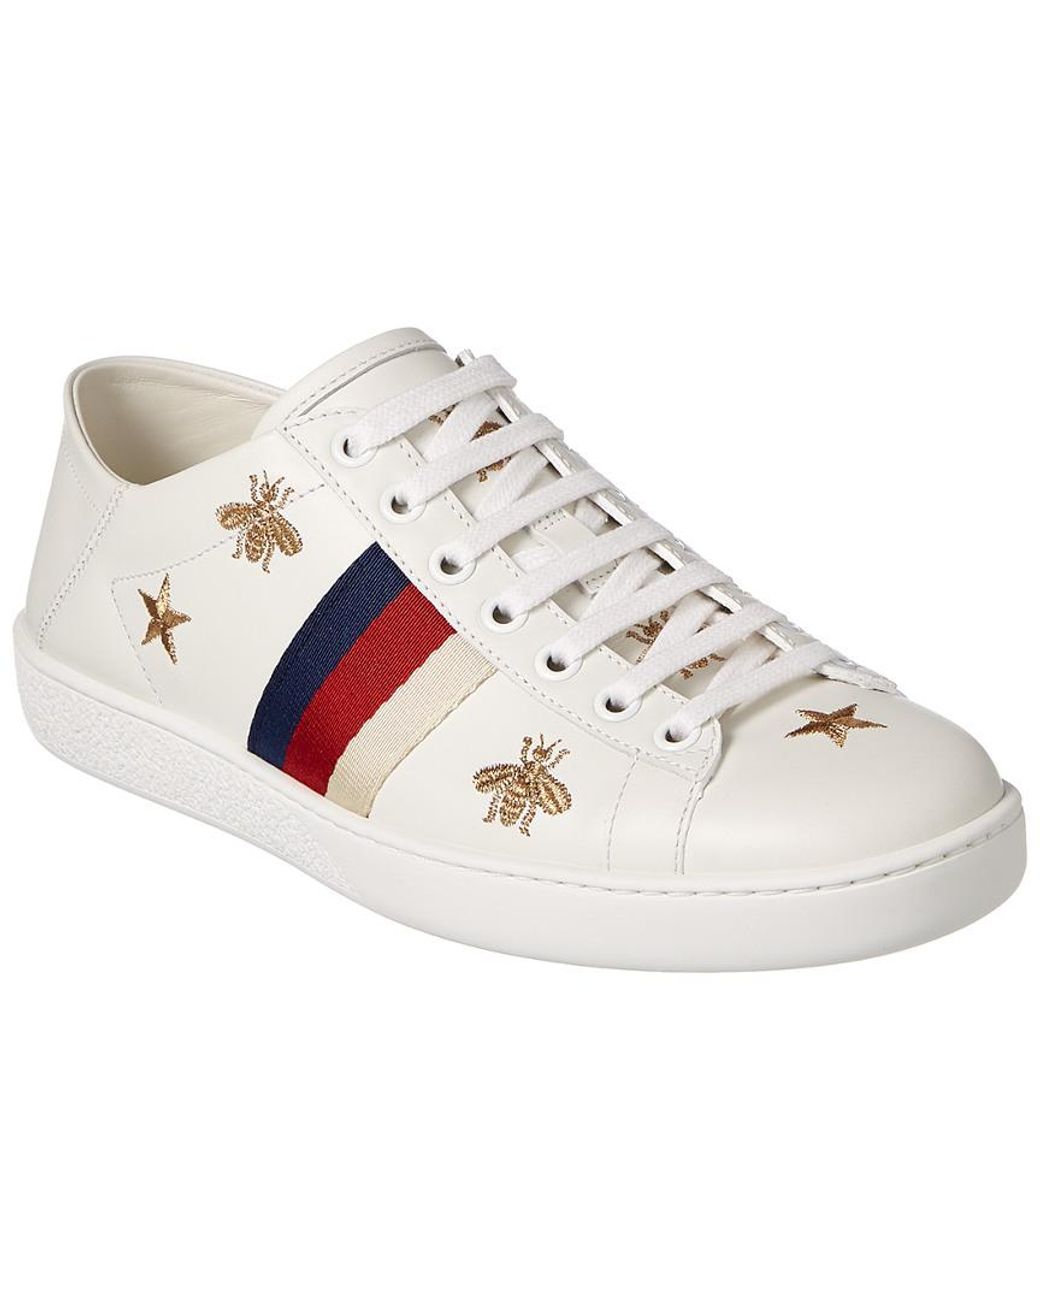 Gucci Ace Bee & Star Collapsible Heel Leather Sneaker in |